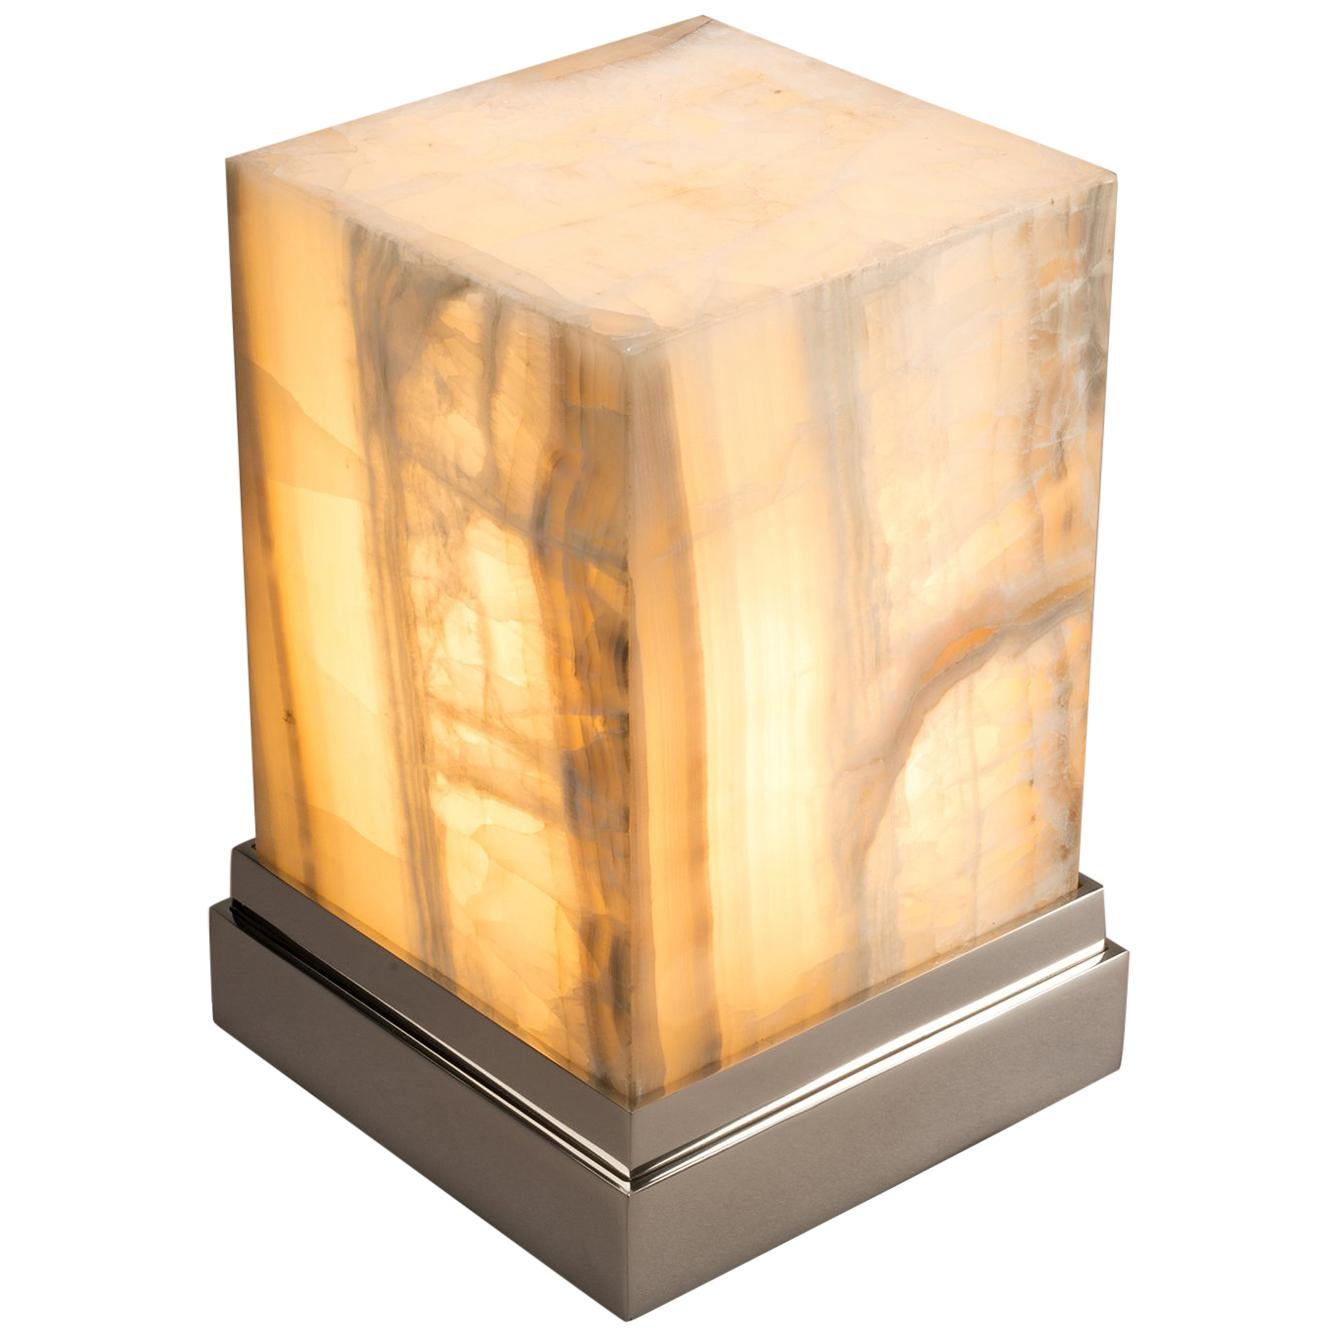 Studio Greytak 'Small Glo 1' Aragonite 'Onyx' and Stainless Steel Lamp For Sale